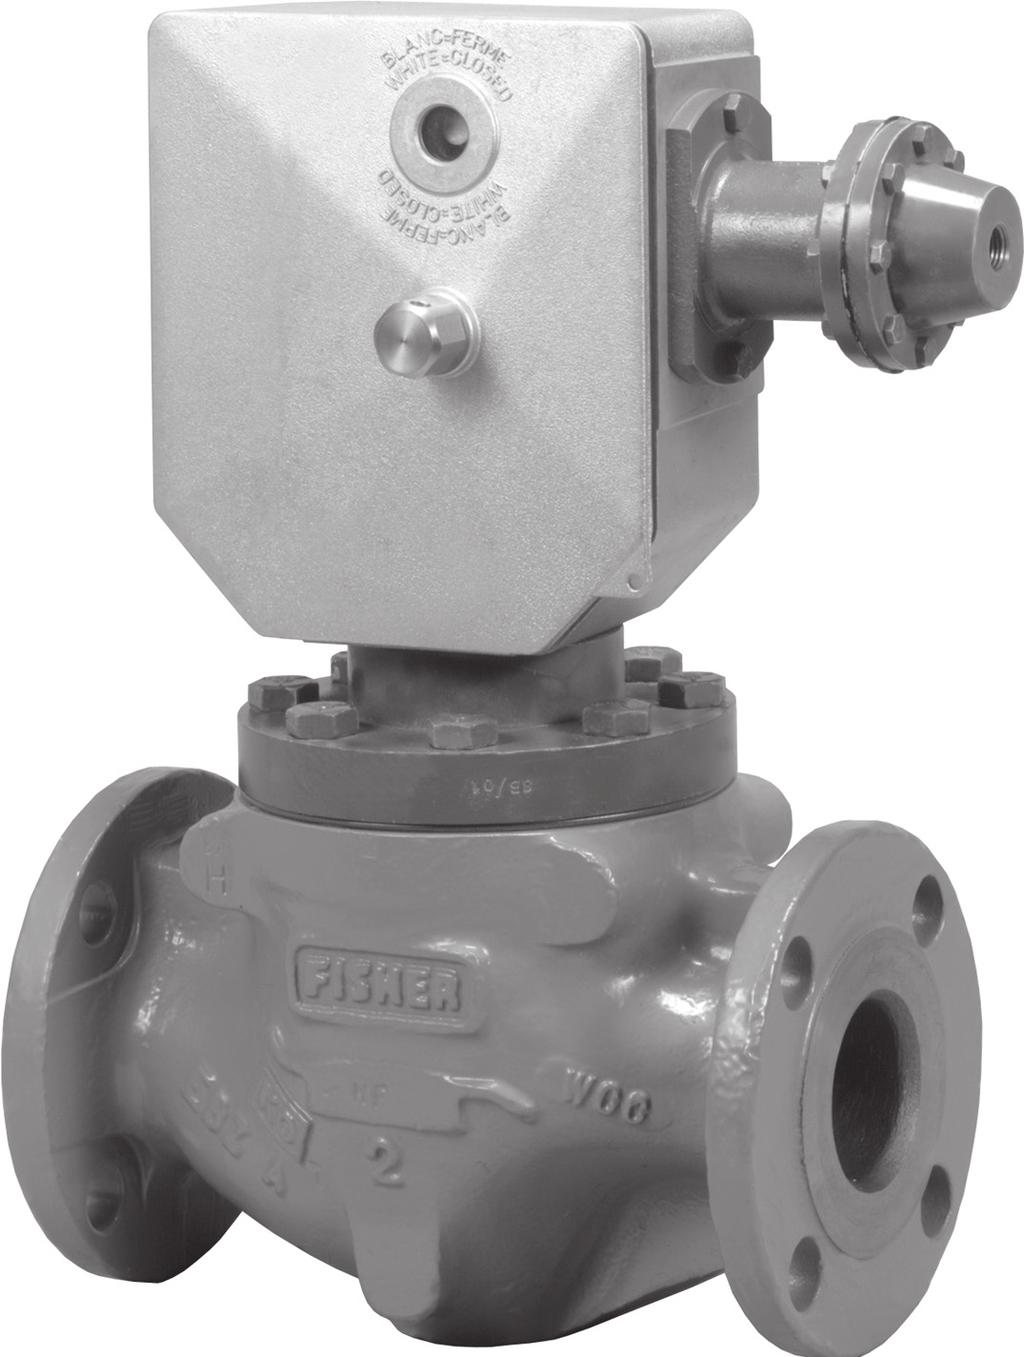 Instruction Manual D103687X012 June 2017 Type OSE SLAM-SHUT VALVE CONTENTS Introduction... 1 Characteristics... 1 Labelling... 2 Dimensions and Weights... 3 Operation... 4 Installation.